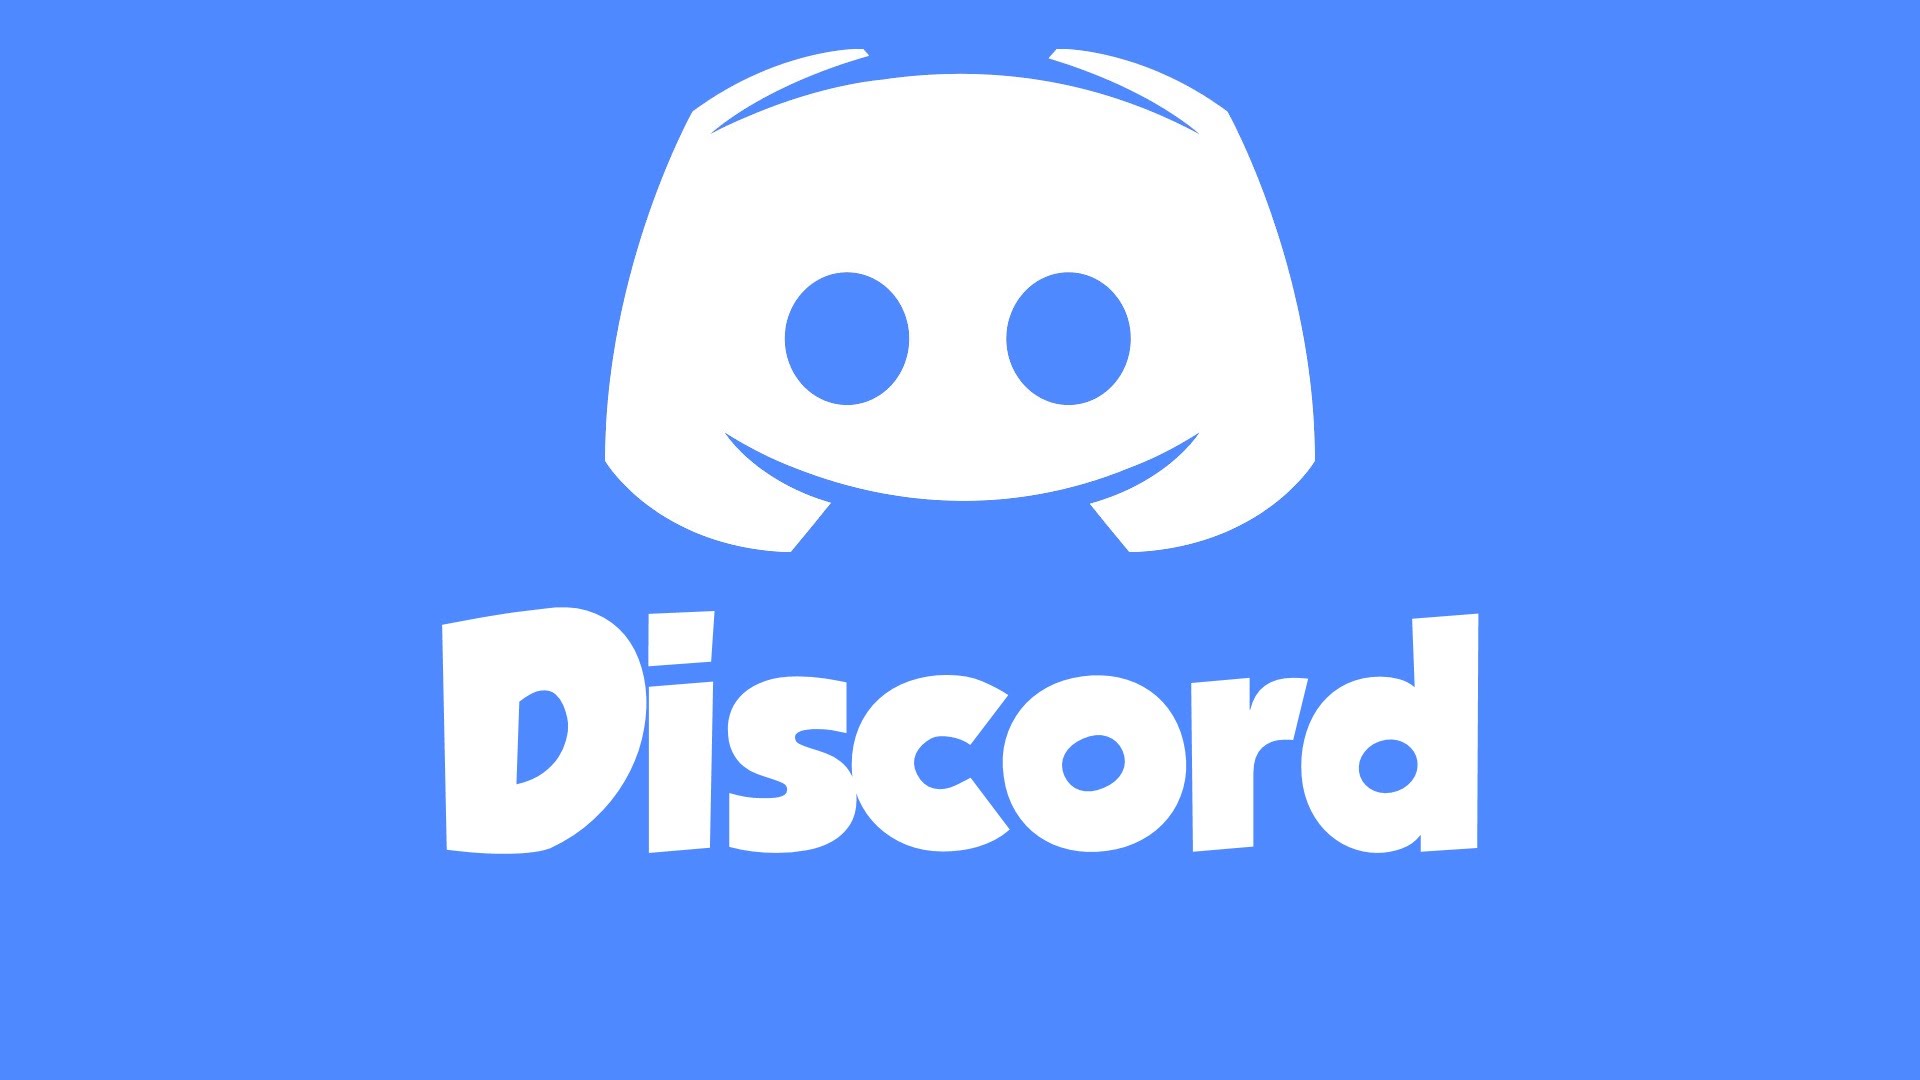 Give you join a link on 25 Discord server from different ip address